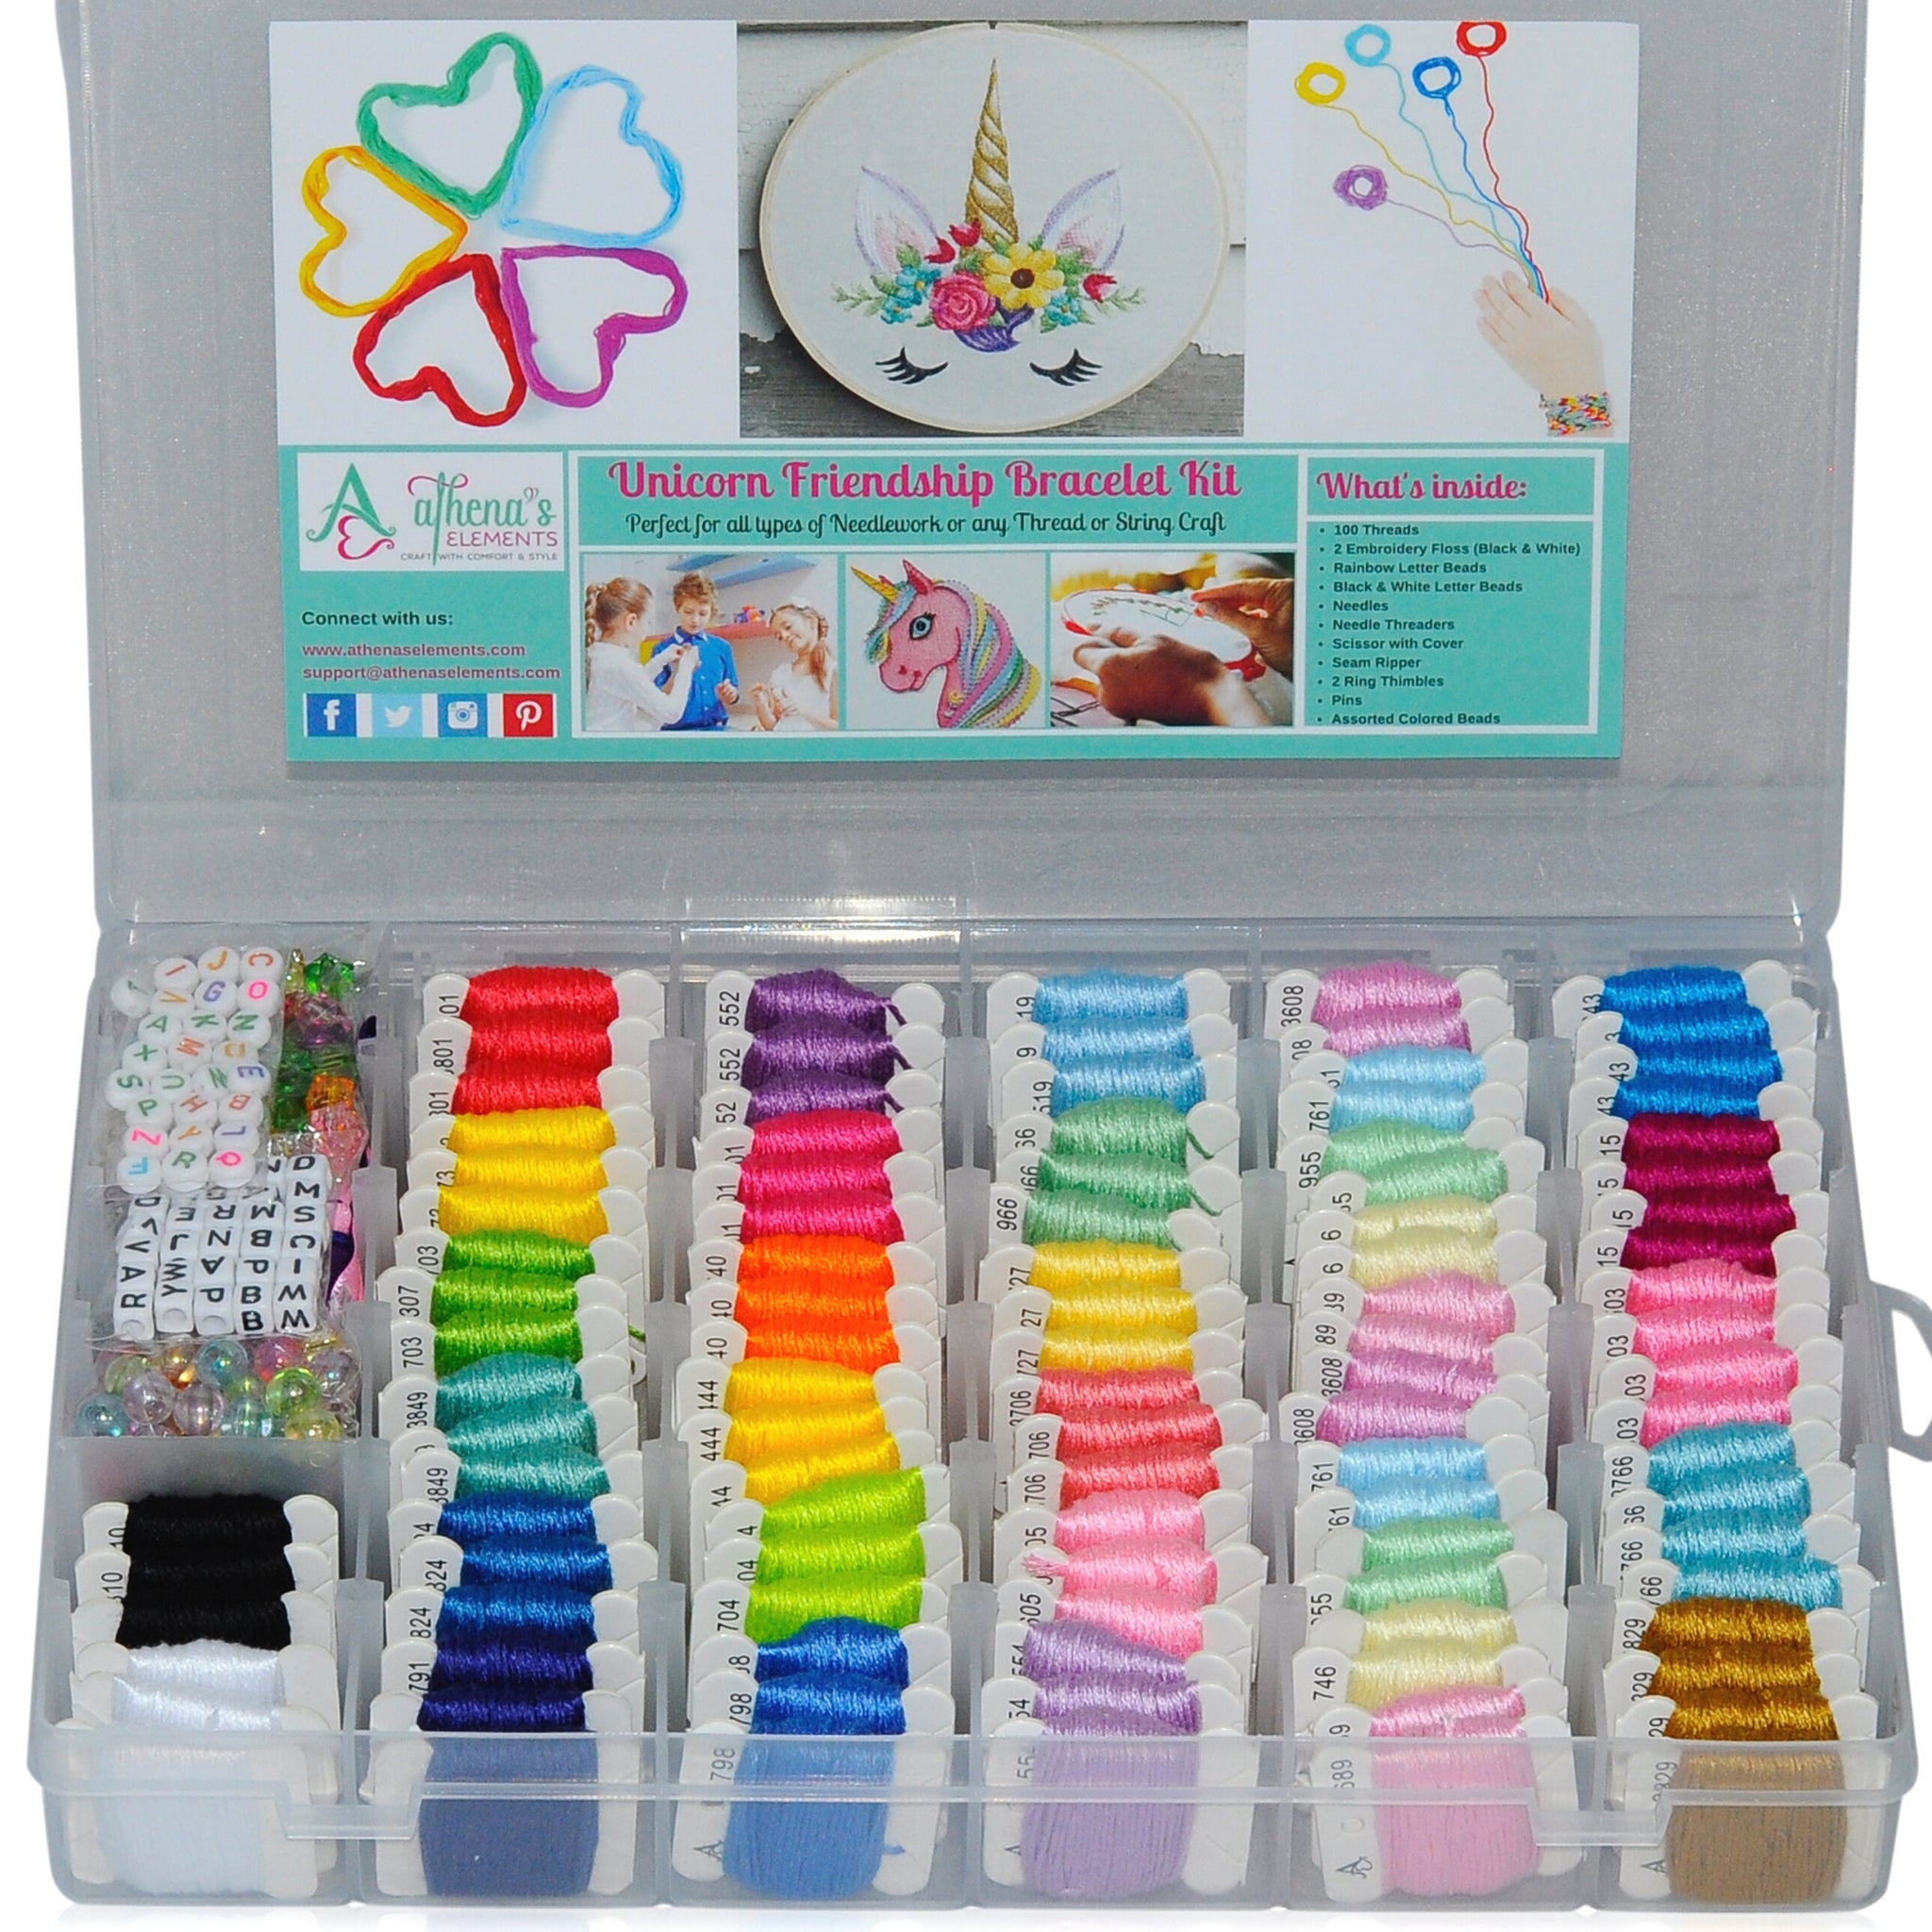 Friendship Bracelet String Kit - 276pcs Embroidery Floss and Accessories - Labeled with Thread Numbers for Cross Stitch Supplies, Embroidery, Cool